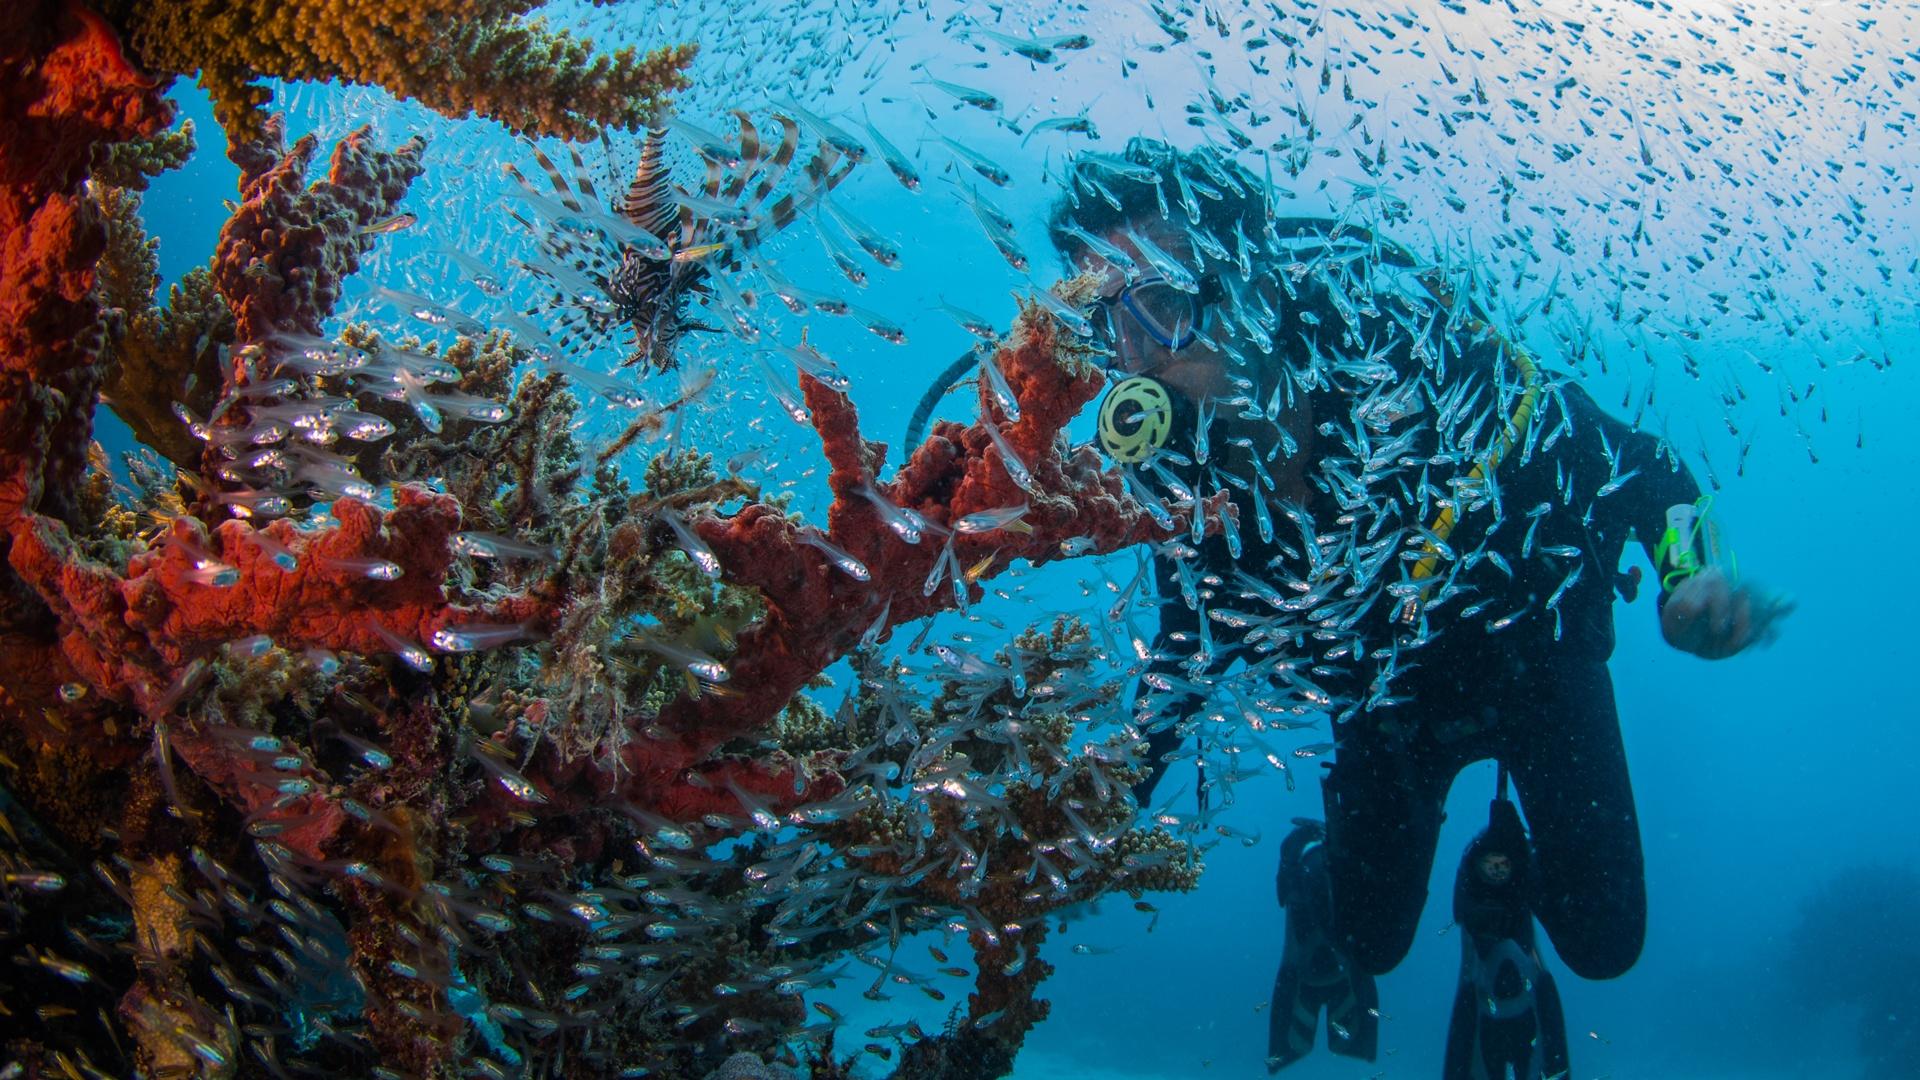 Commercial dive instructor, Paddy Colwell, observes a Lionfish amid coral on the Great Barrier Reef.